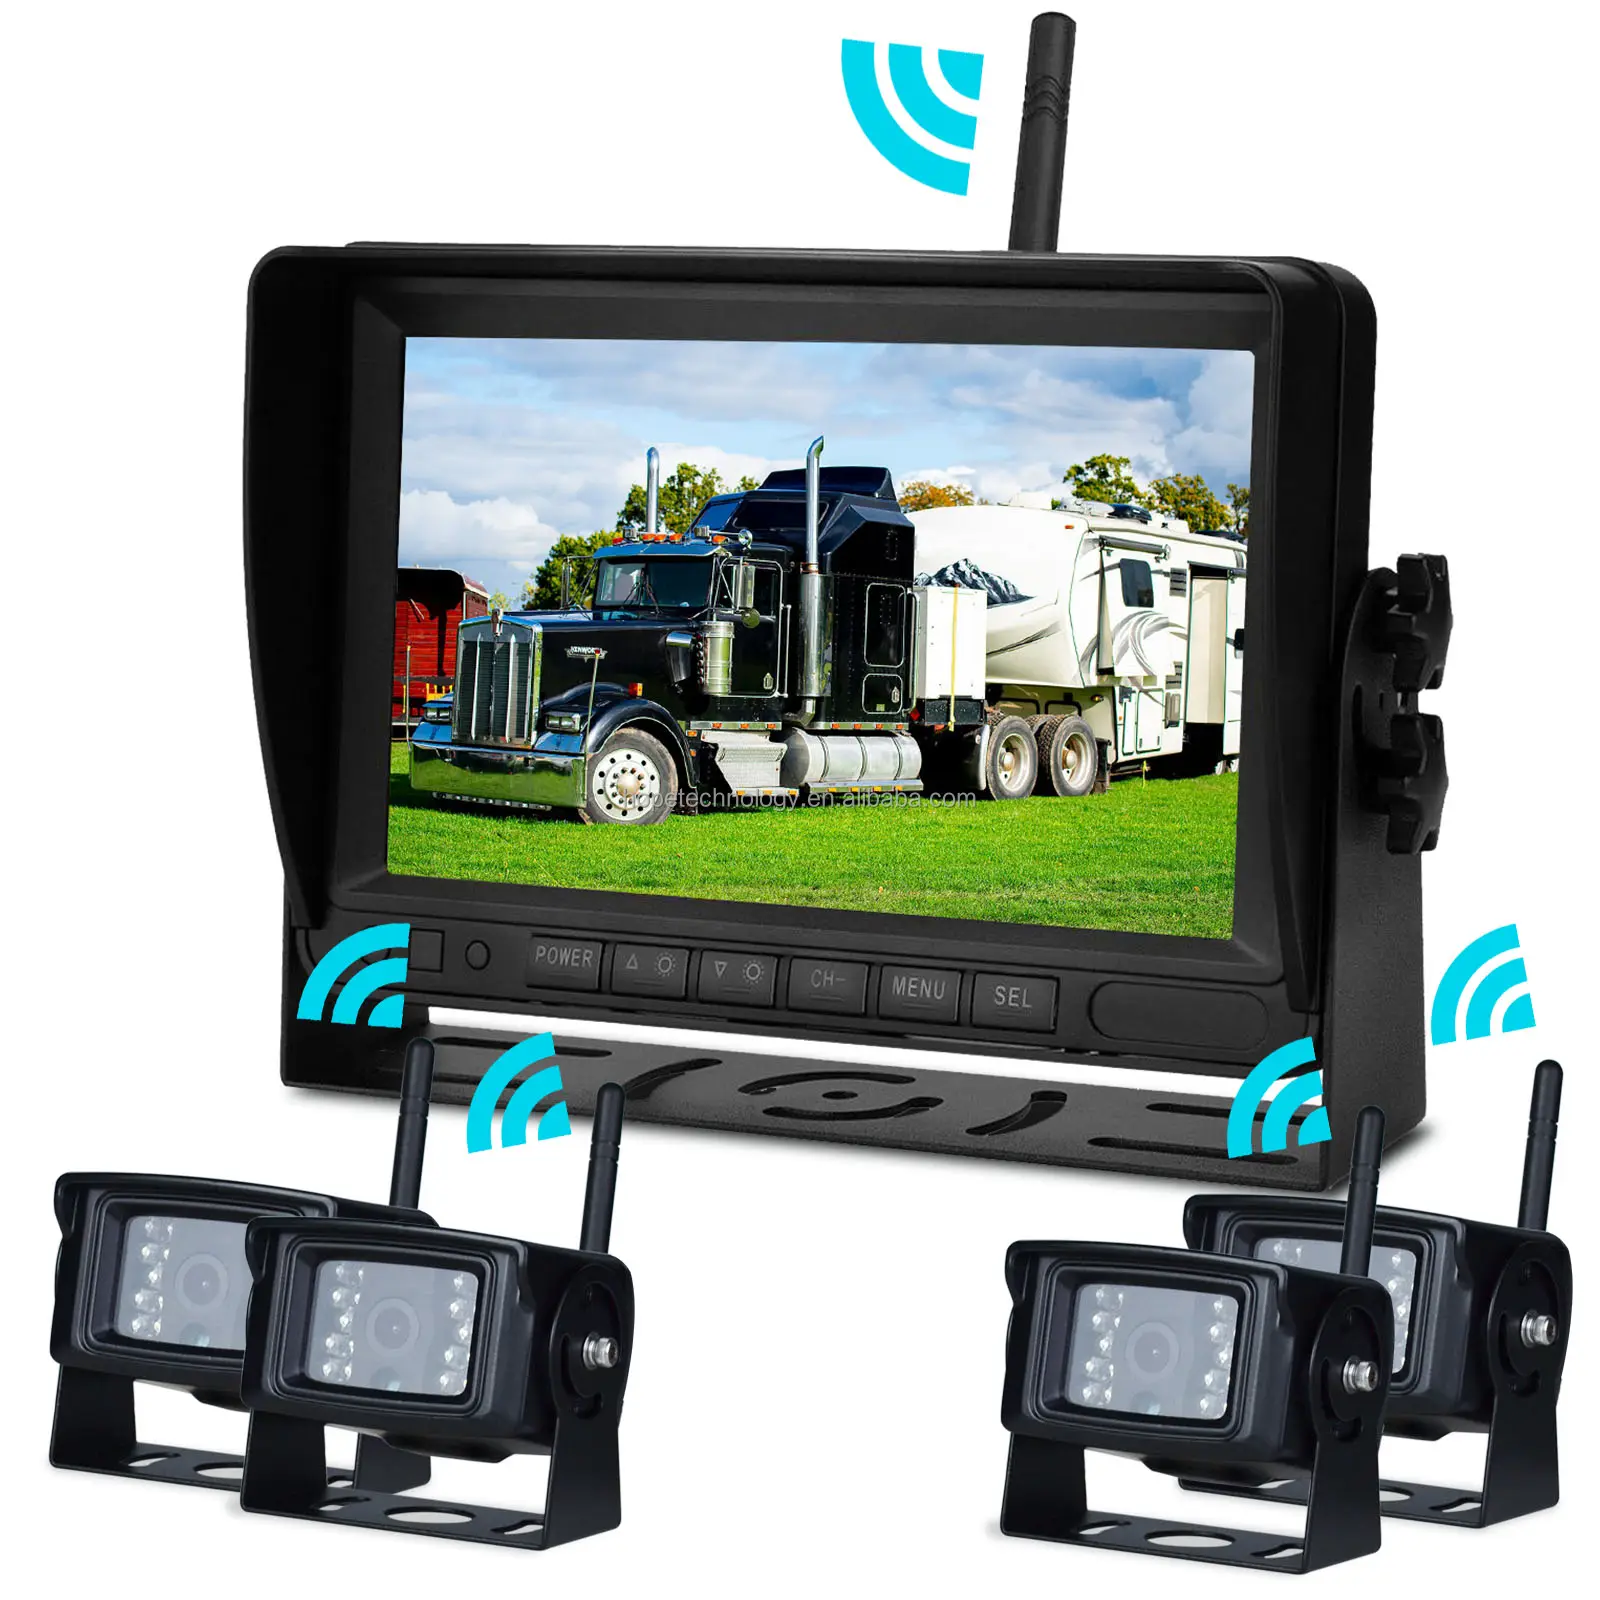 Dual Antenna Strong Wireless Stable digital truck camera system wireless monitor for vehicle